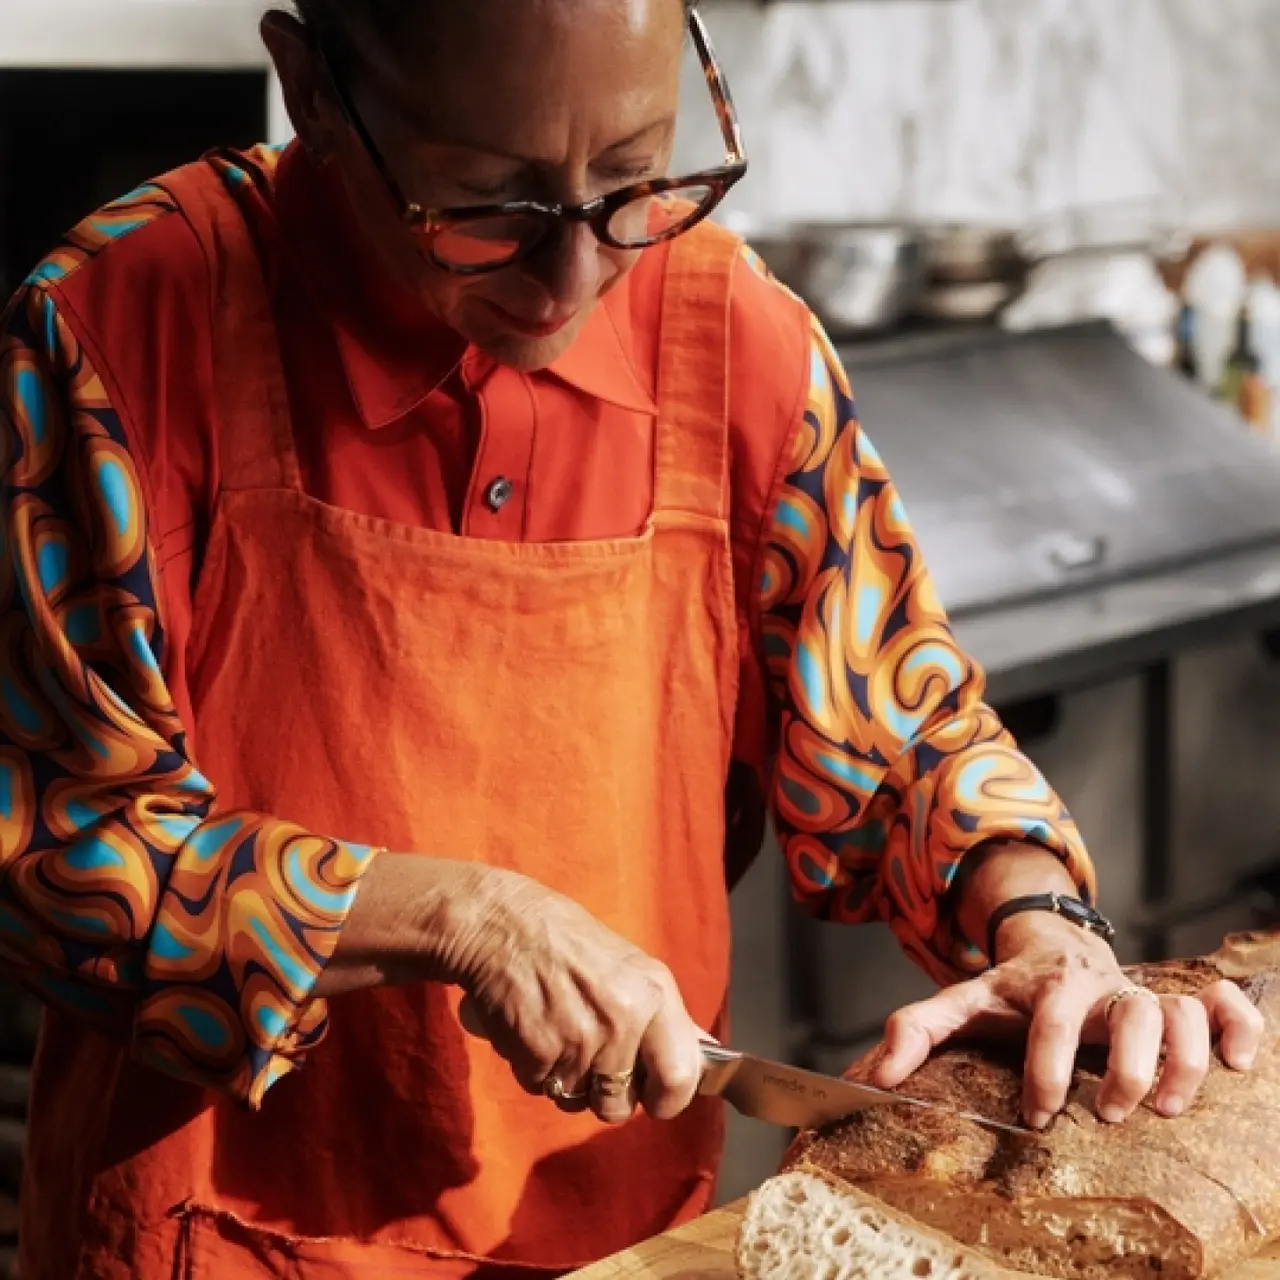 A person wearing glasses and a colorful apron carefully slices bread on a wooden cutting board.